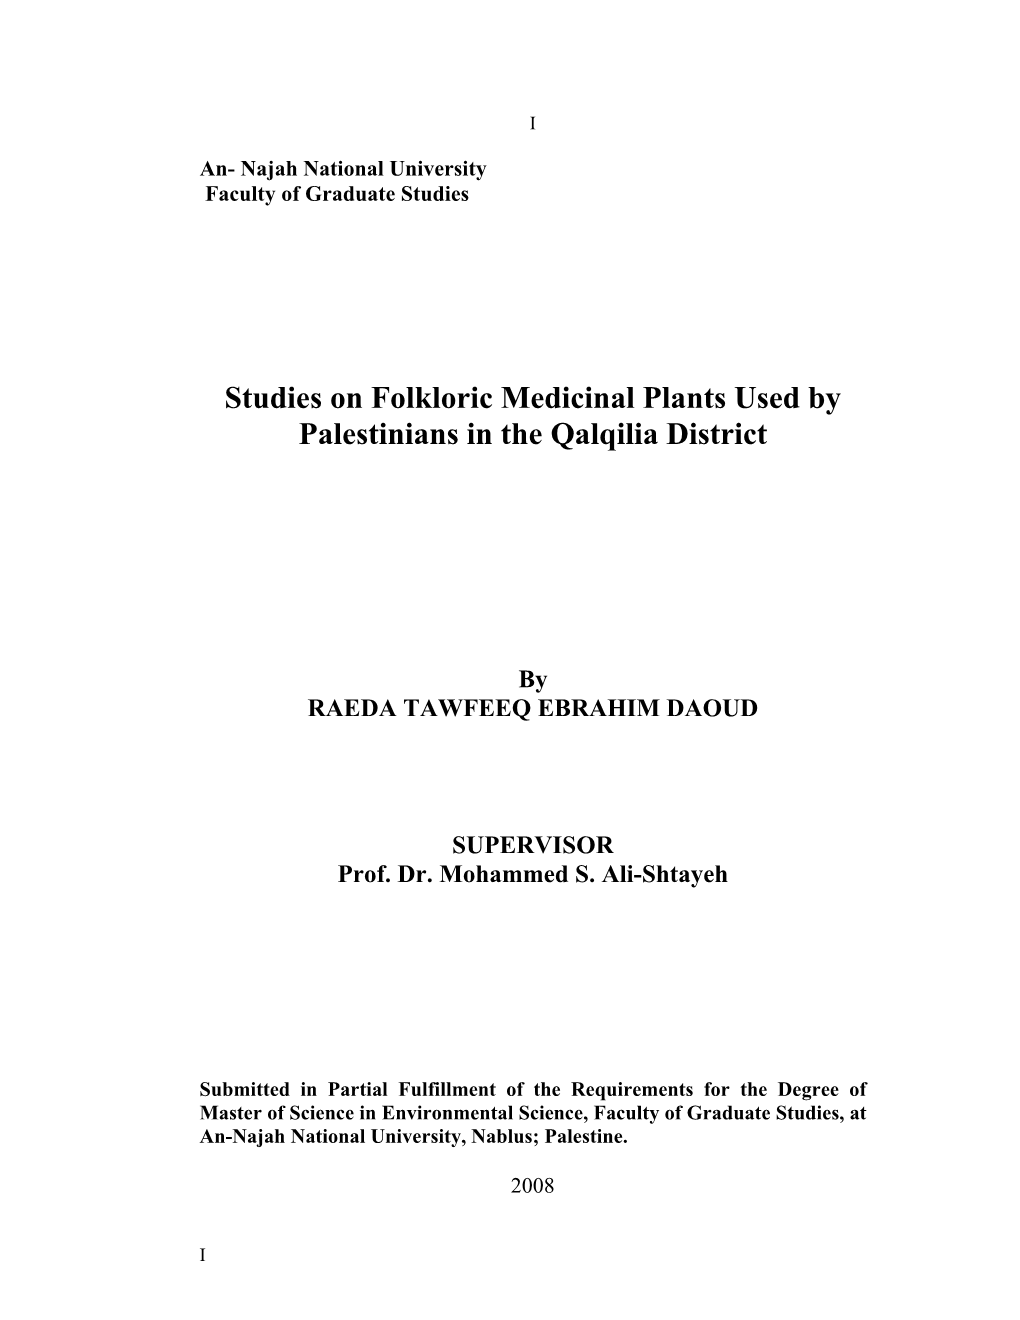 Studies on Folkloric Medicinal Plants Used by Palestinians in the Qalqilia District